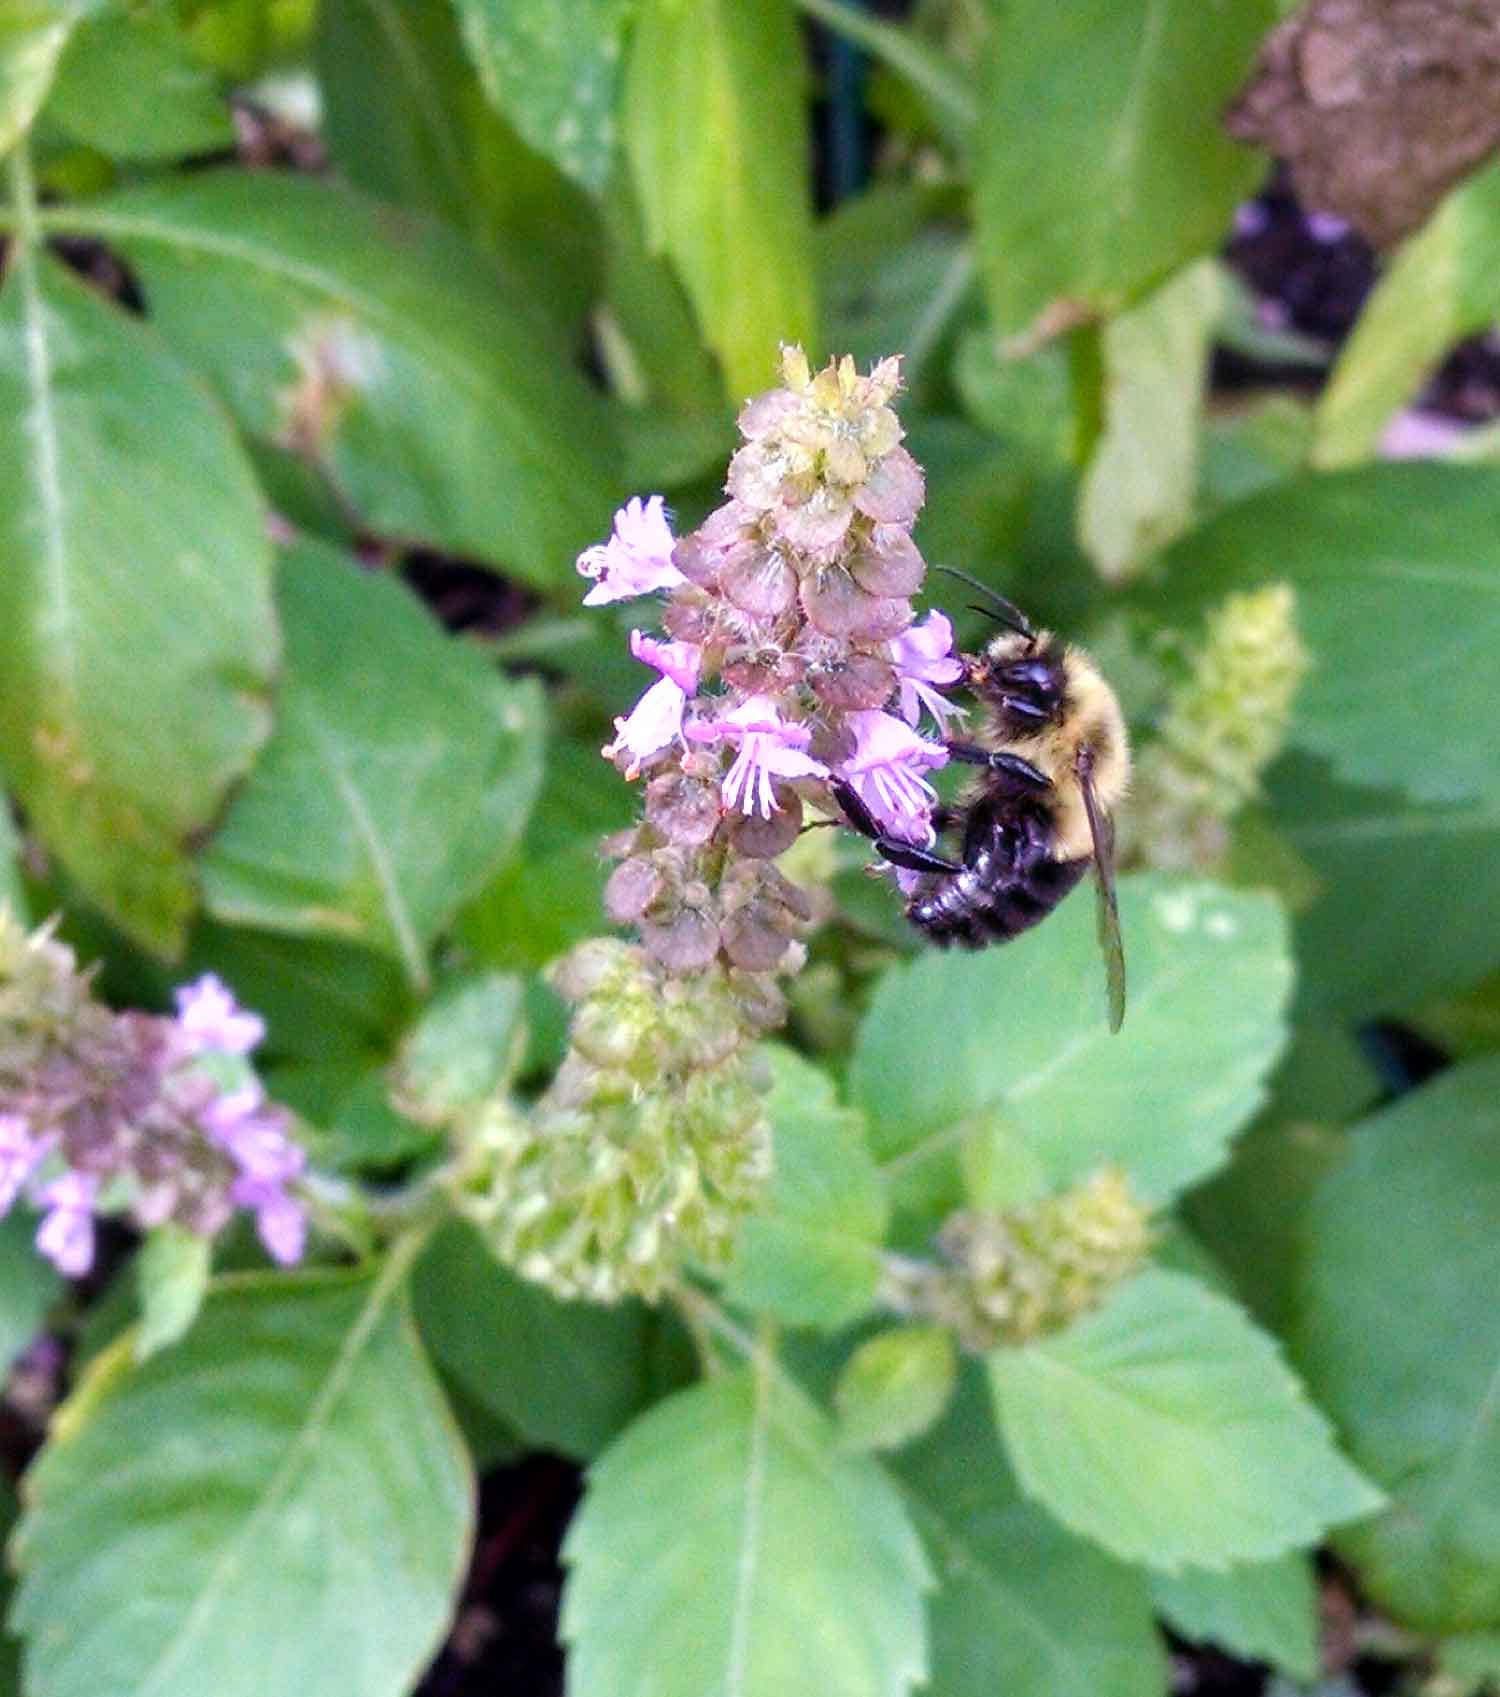 Bumblebee on a Holy basil flower.